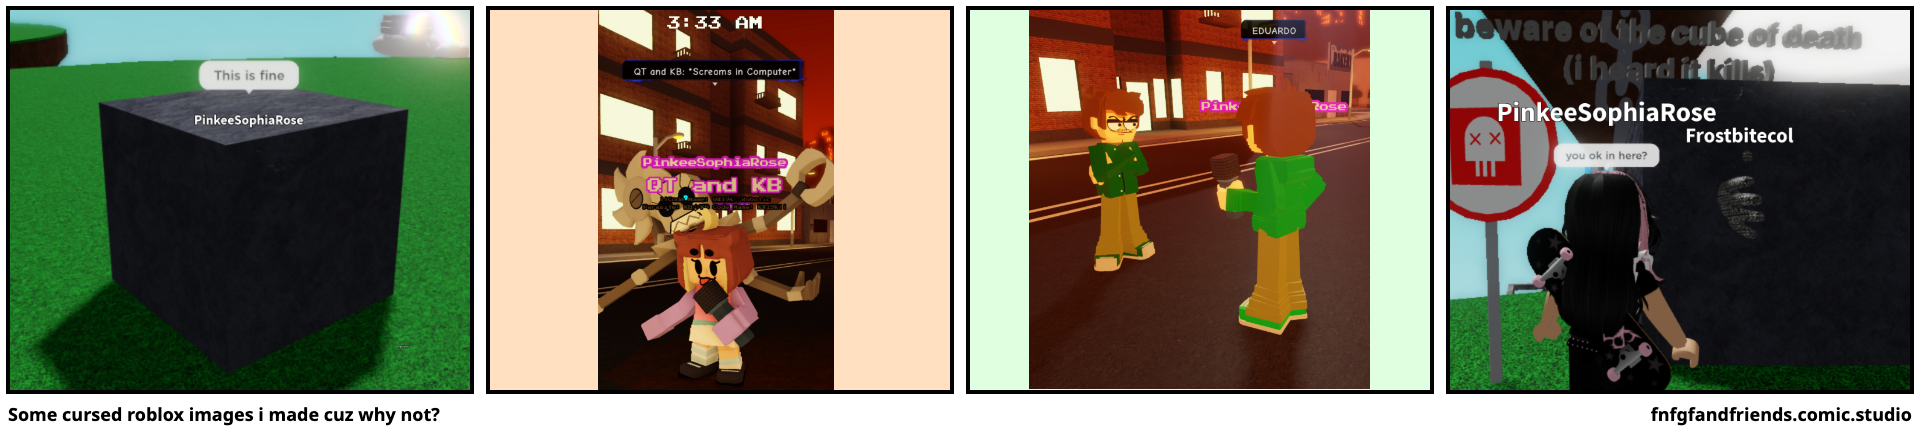 Some cursed roblox images i made cuz why not?